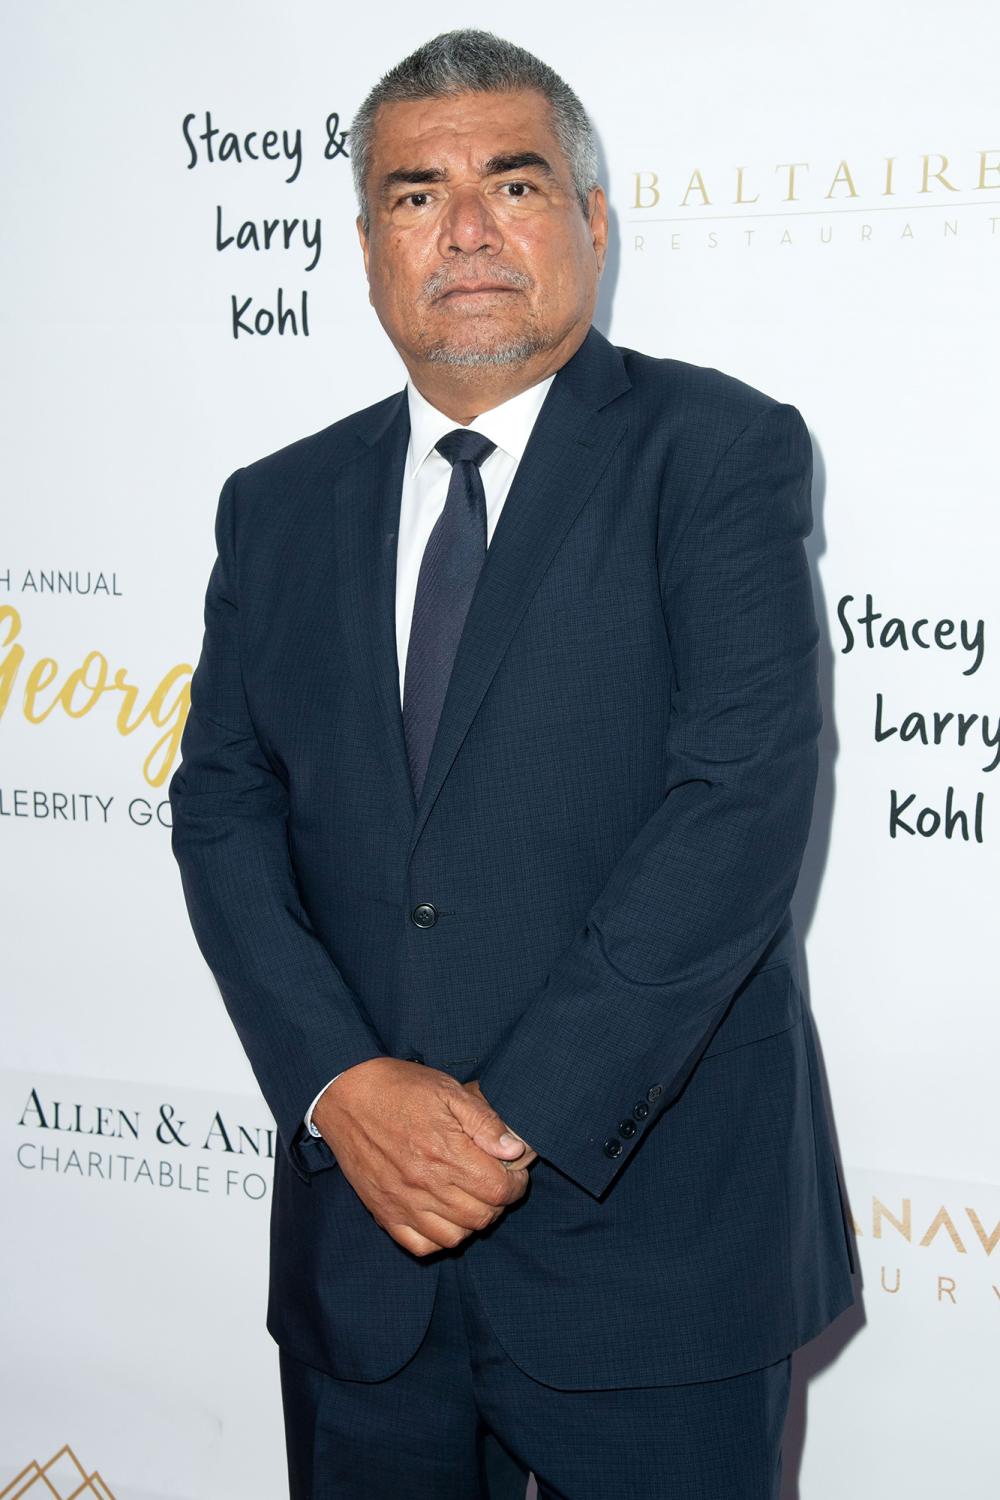 George Lopez Cuts His New Years Eve Comedy Show Short After Getting Sick on Stage